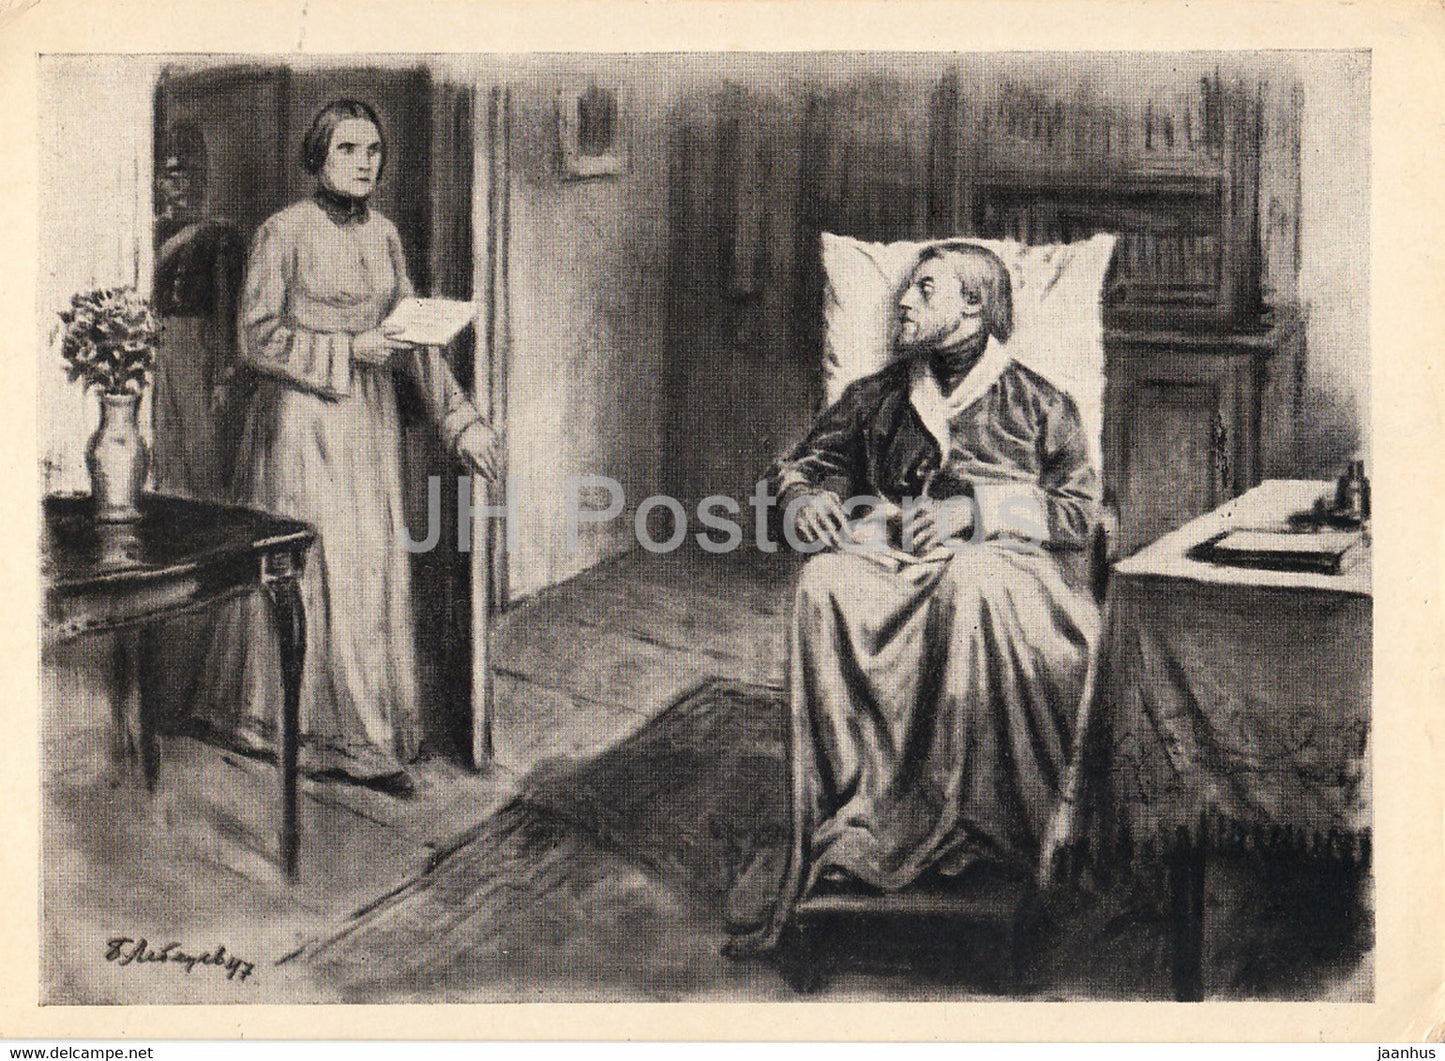 Russian literary critic Vissarion Belinsky - Subpoena to the gendarme office in 1848 - 1962 - Russia USSR - unused - JH Postcards